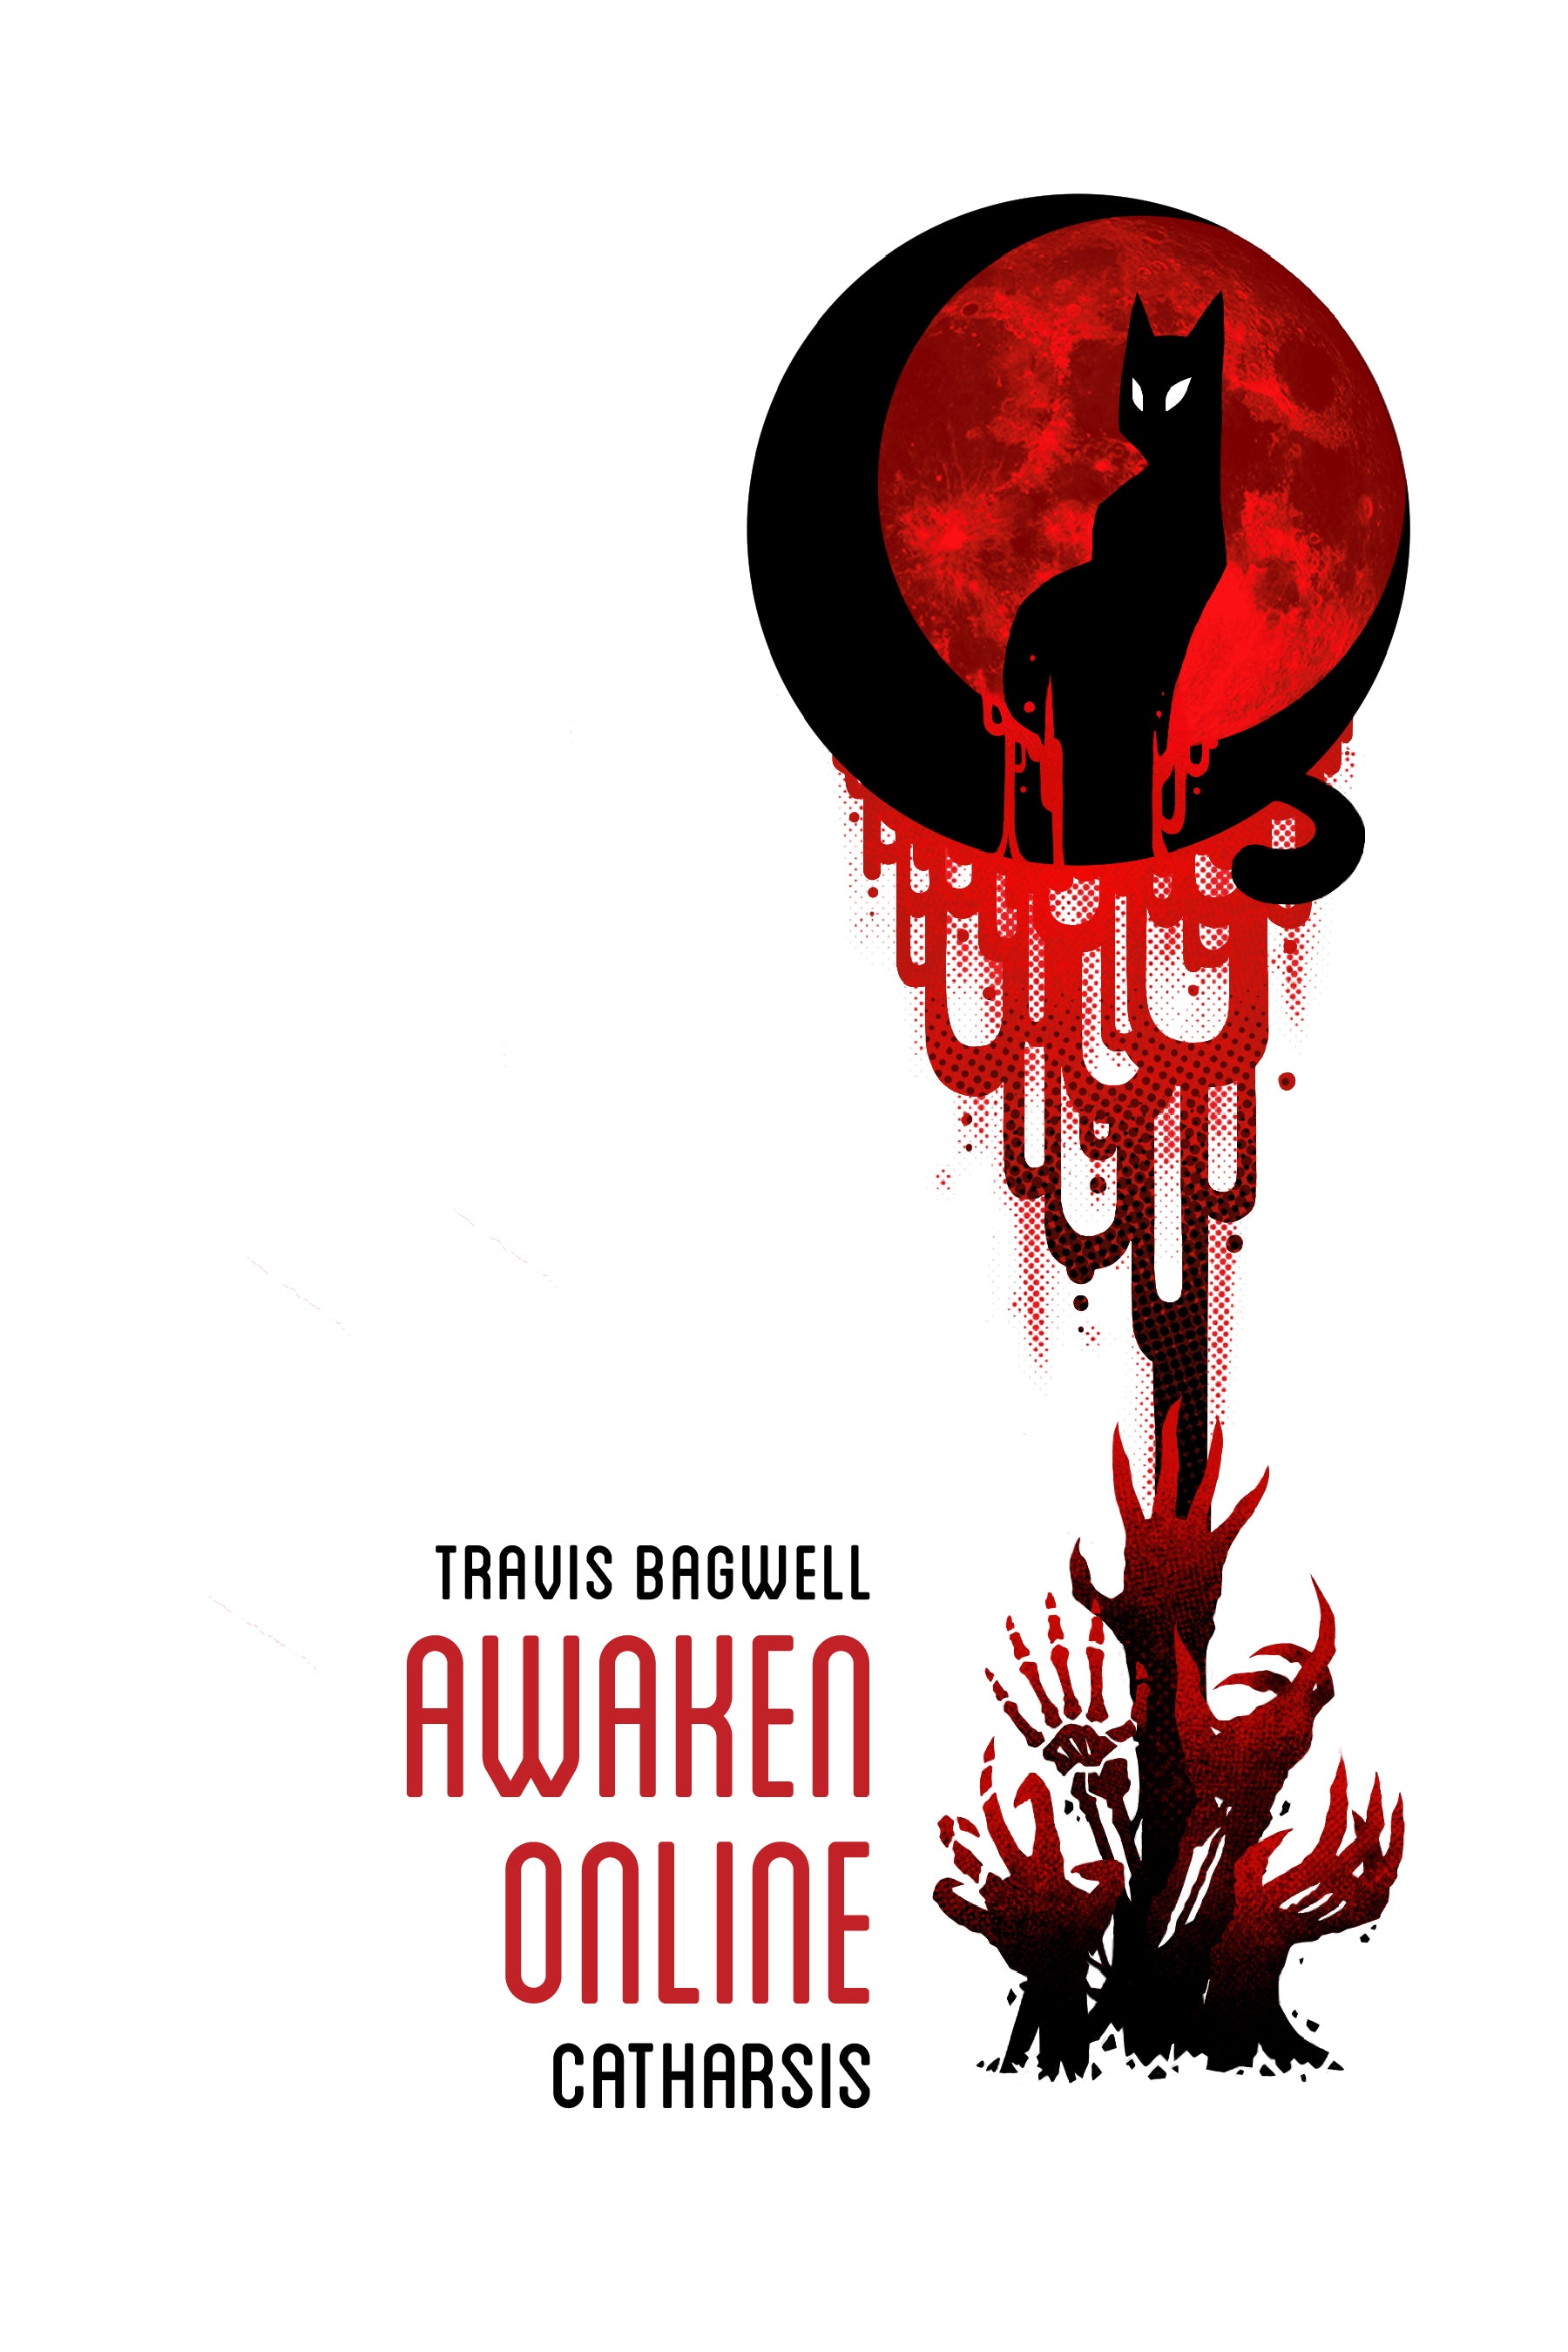 Awaken Online: Catharsis - Signed Print Edition